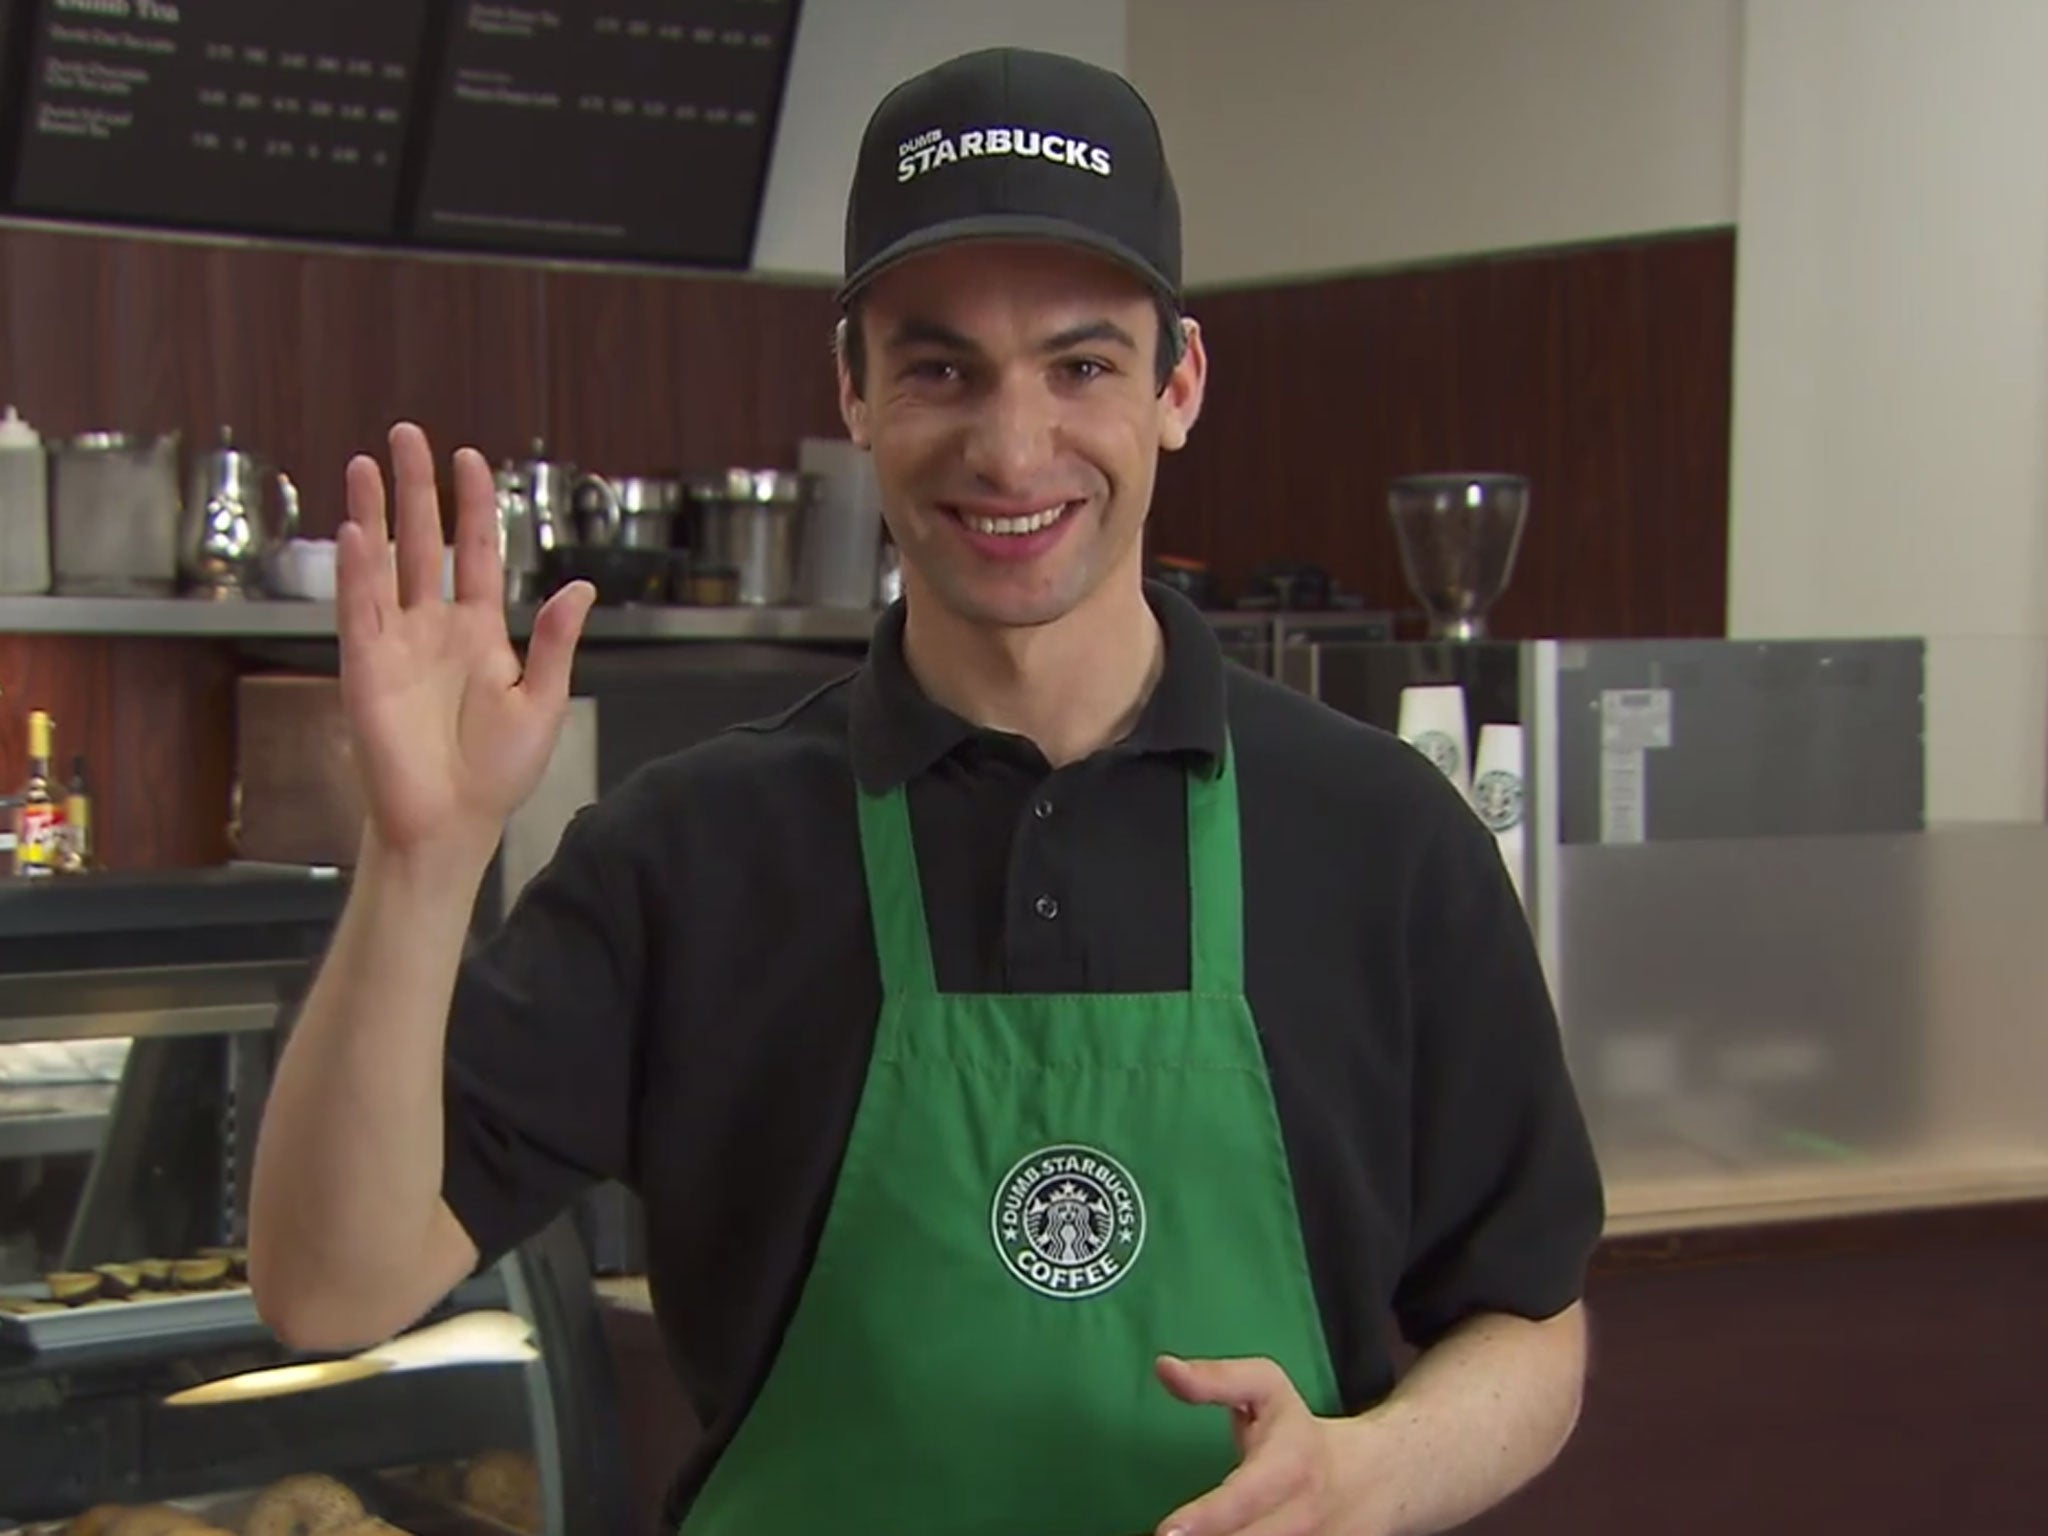 The Canadian Comedy Central TV comedian Nathan Fielder revealed himself as the Dumb Starbucks owner, and said it was a stunt poking fun at the 'American dream'